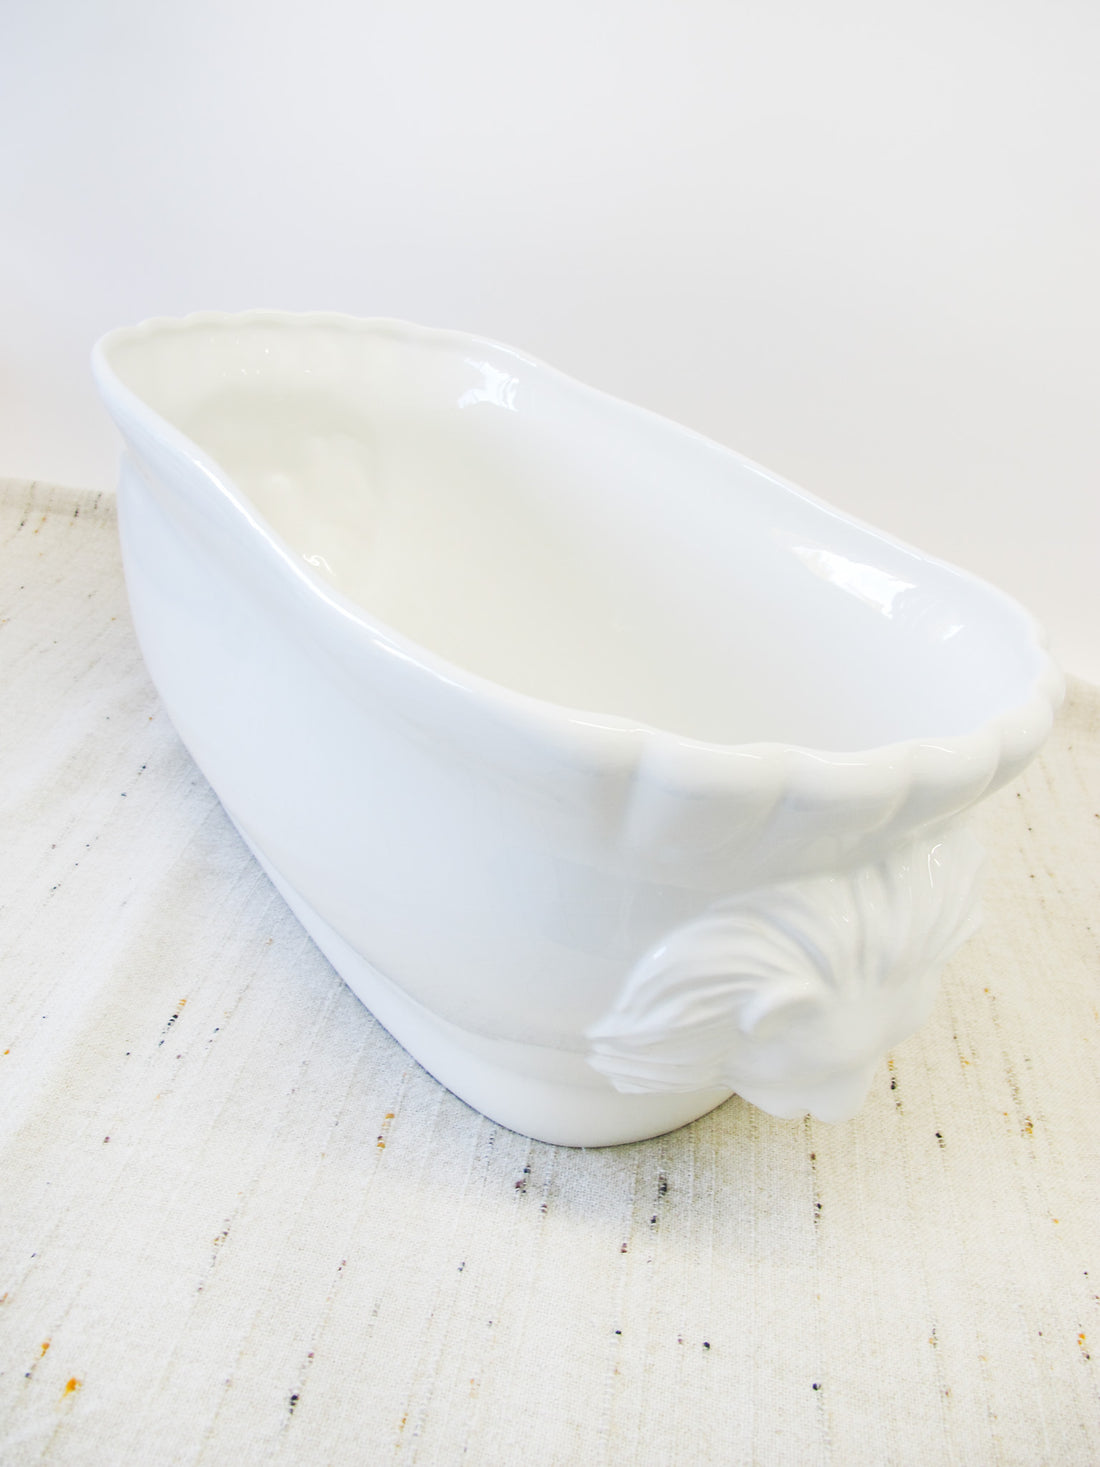 Large Italian White Ceramic Serving Bowl with Lions Heads